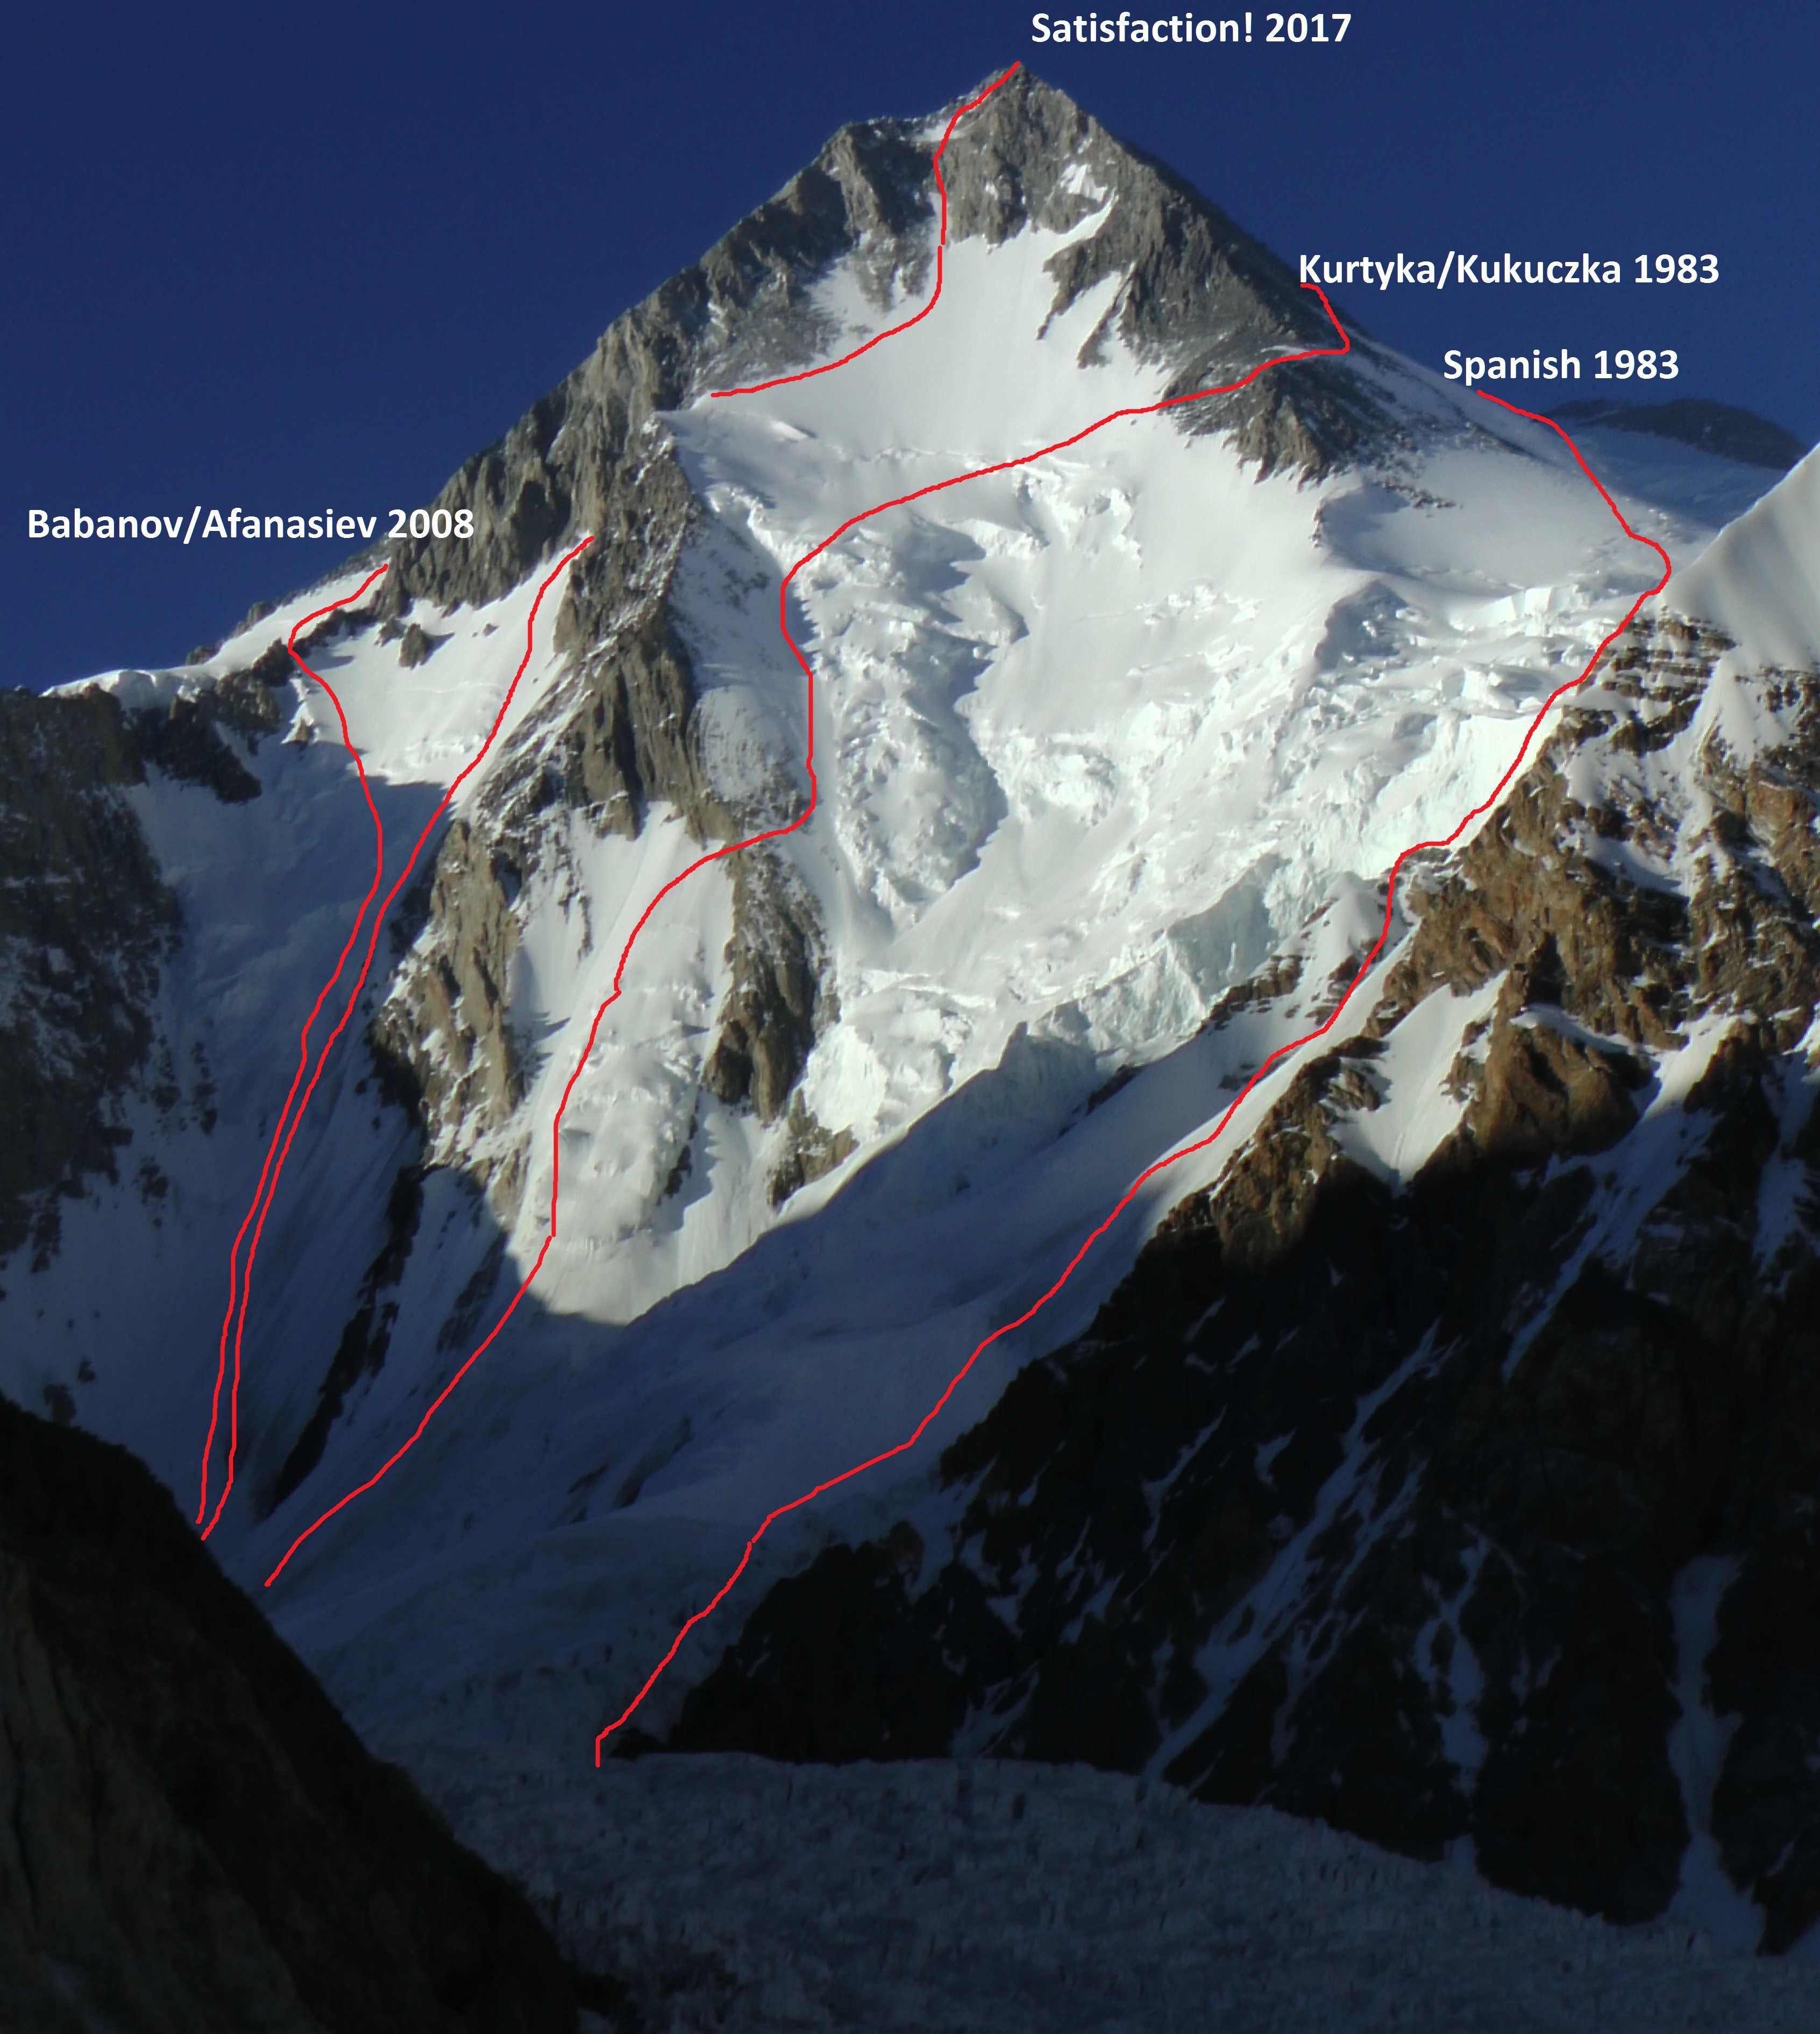 Gasherbrum I (8080m): Satisfaction (ED+ M7 WI5+ 70°, 3000m) is the second line from the left. [Image] Marek Holecek